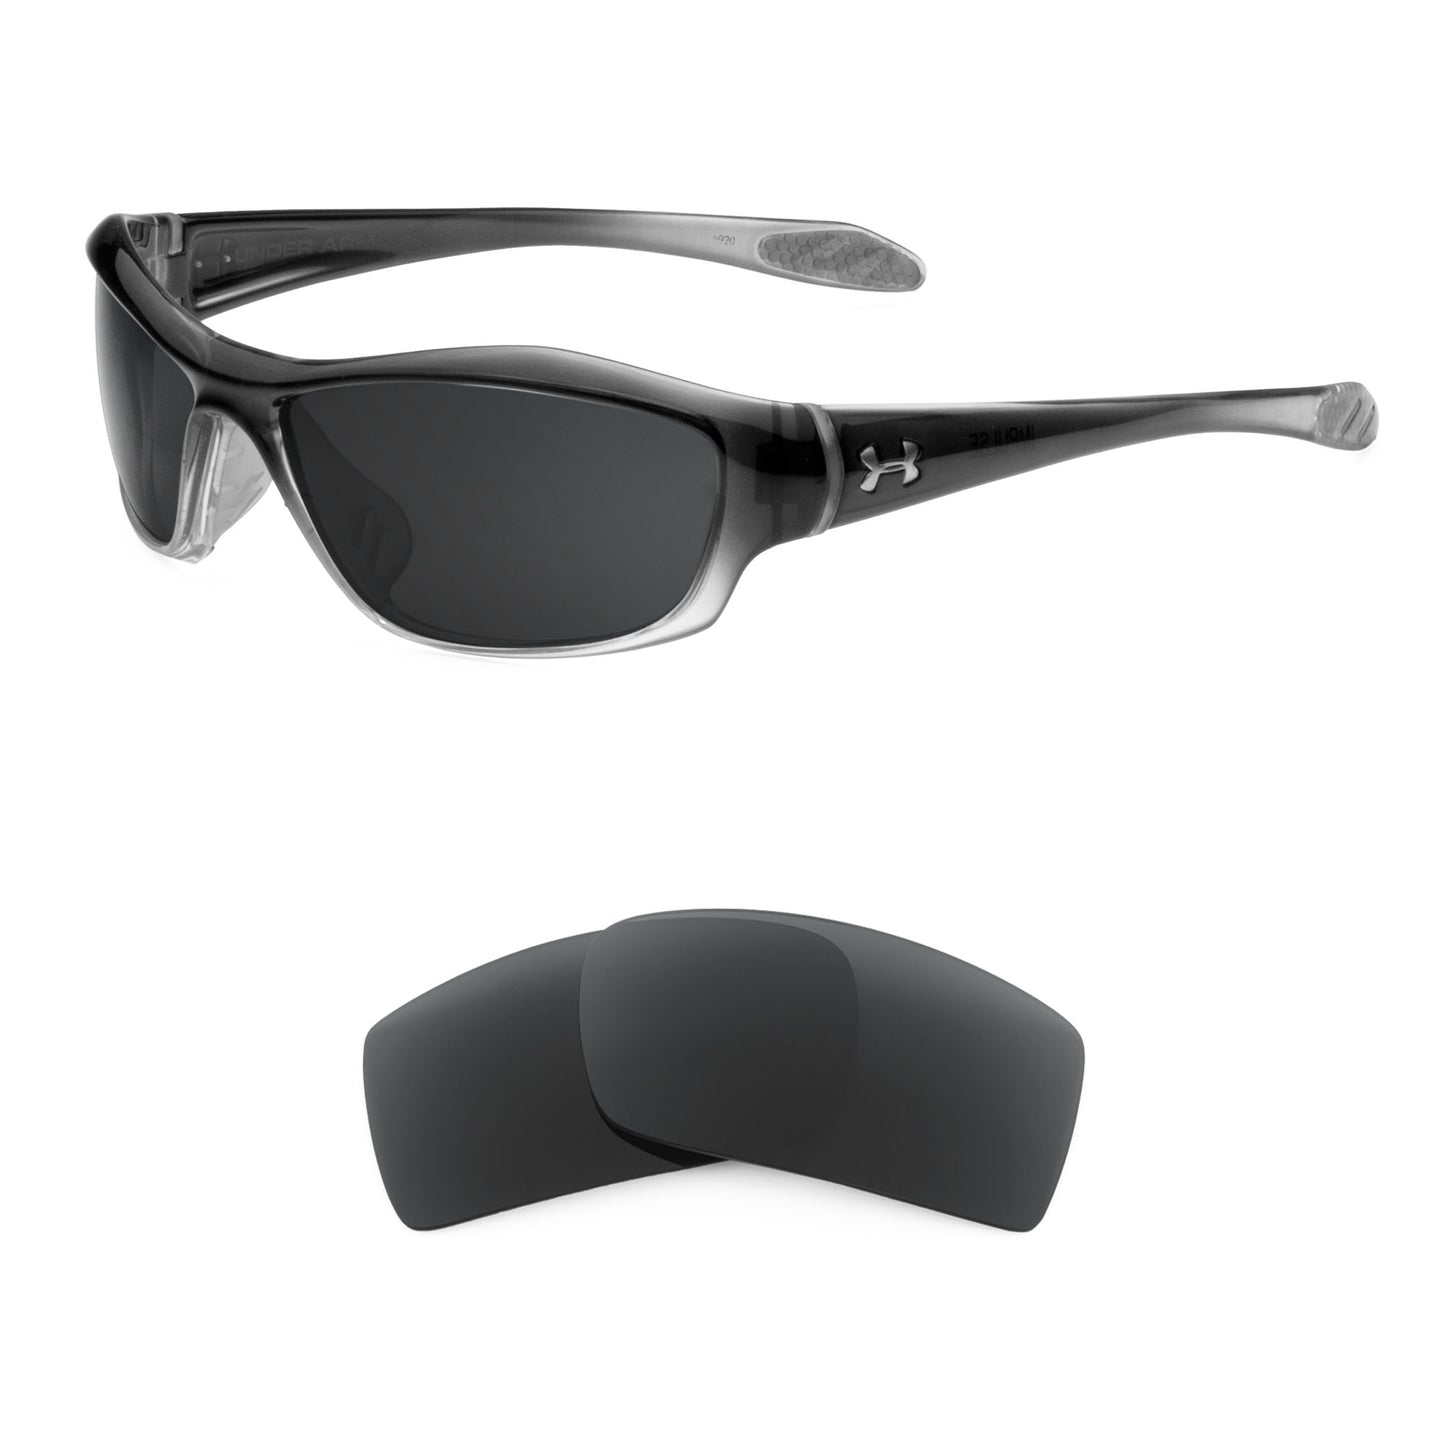 Under Armour Impulse sunglasses with replacement lenses